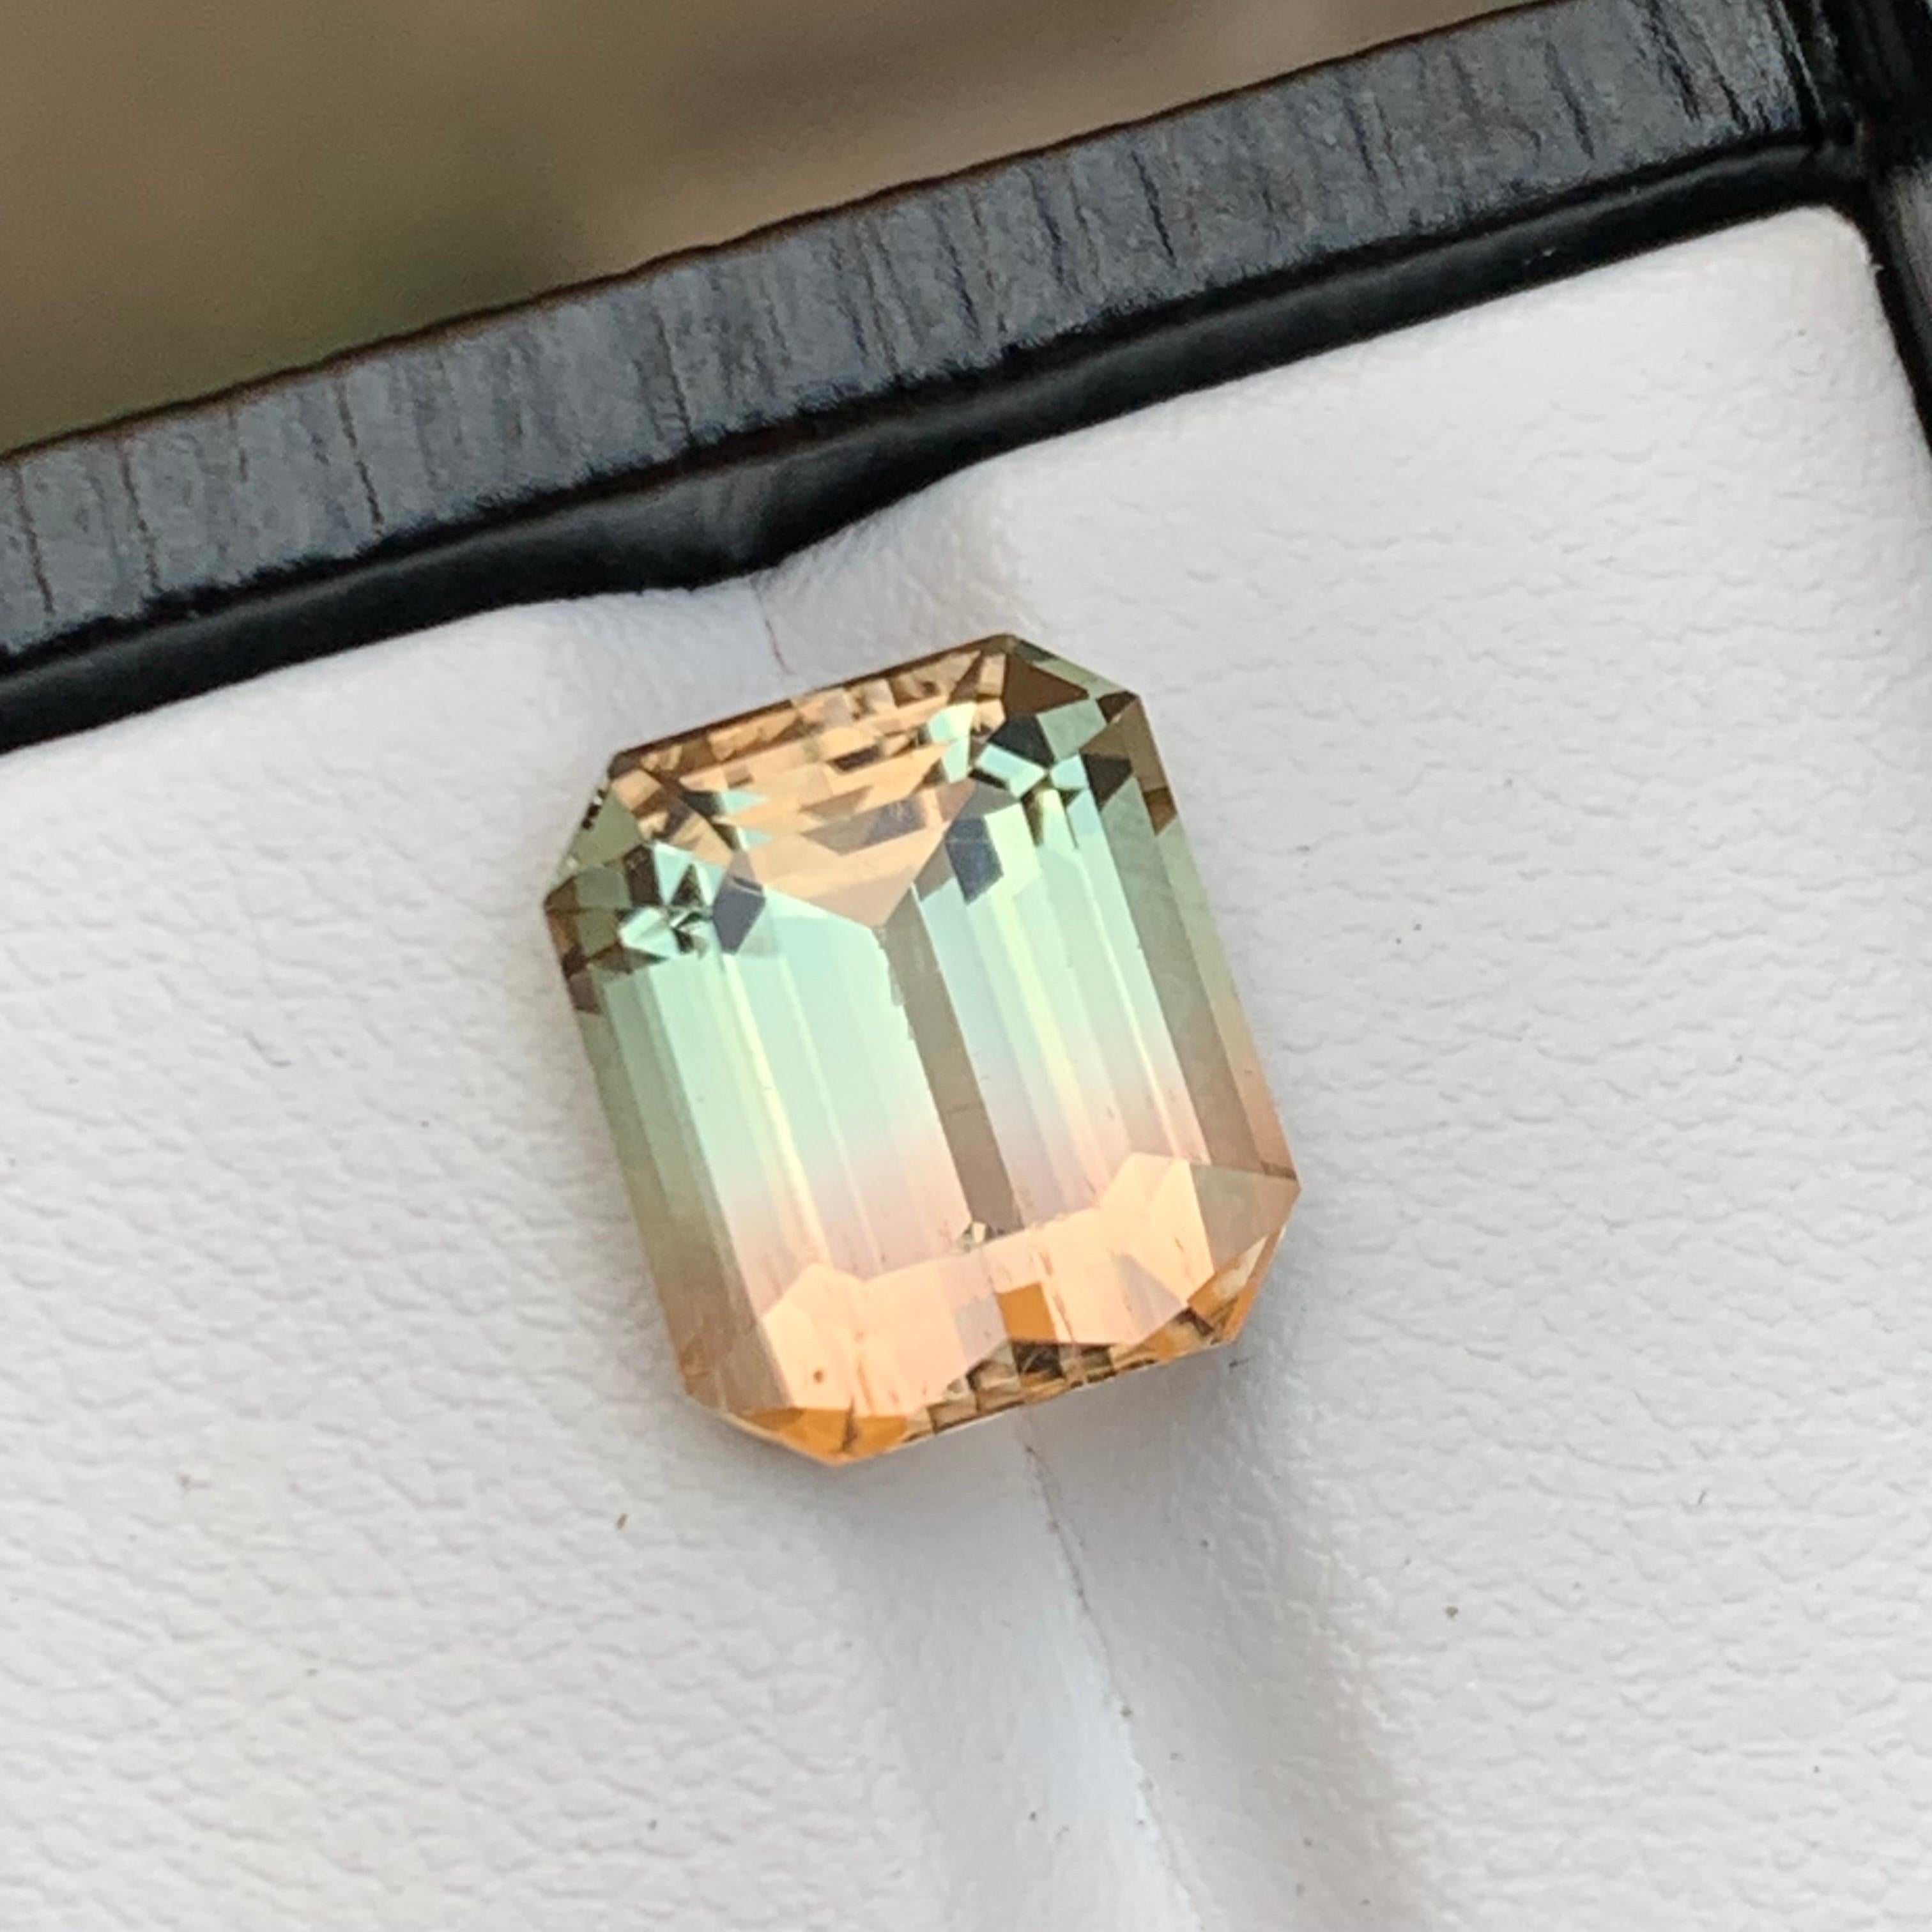 Introducing our stunning 5.80 Carat Bicolor Natural Tourmaline Loose Gemstone, sourced from Africa and meticulously crafted in an elegant emerald cut. Revel in its exceptional luster and eye-clean clarity, making it the ideal choice for both refined